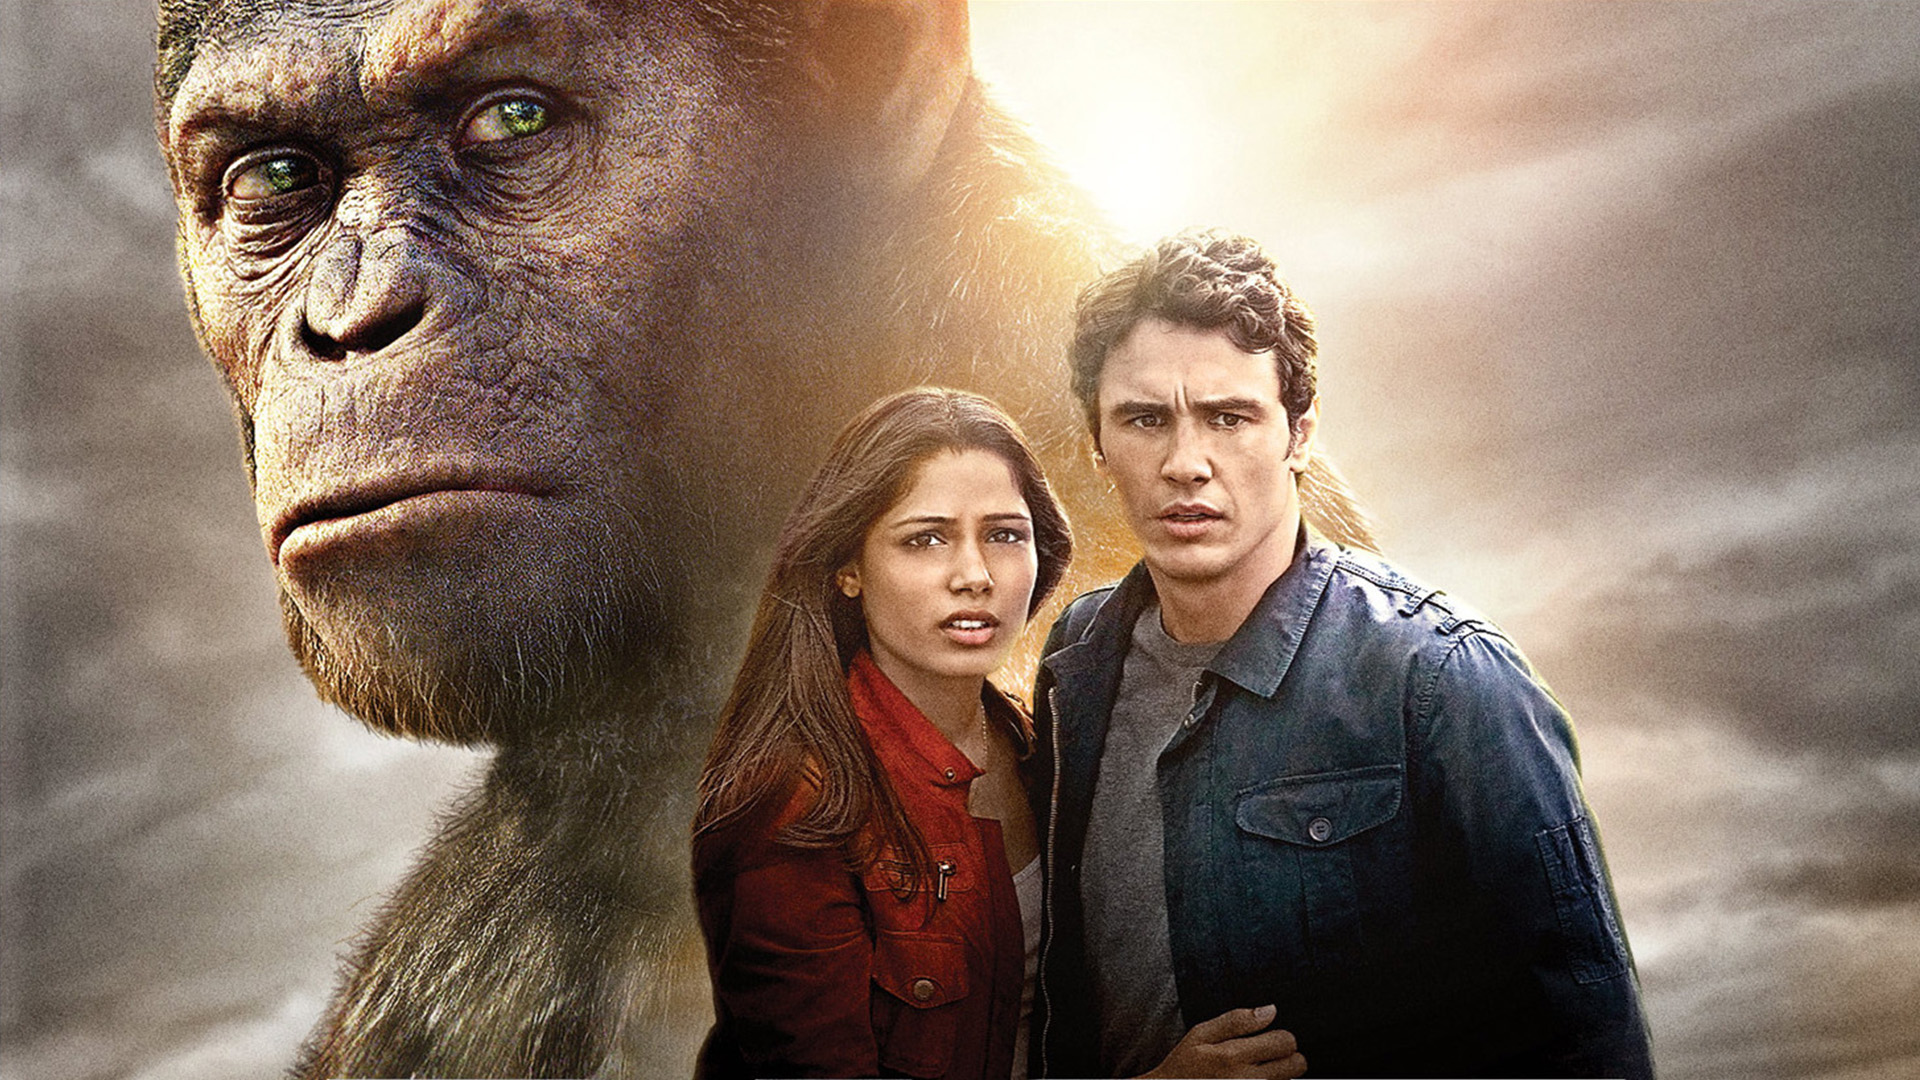 movie, rise of the planet of the apes, andy serkis, caesar (planet of the apes), freida pinto, james franco